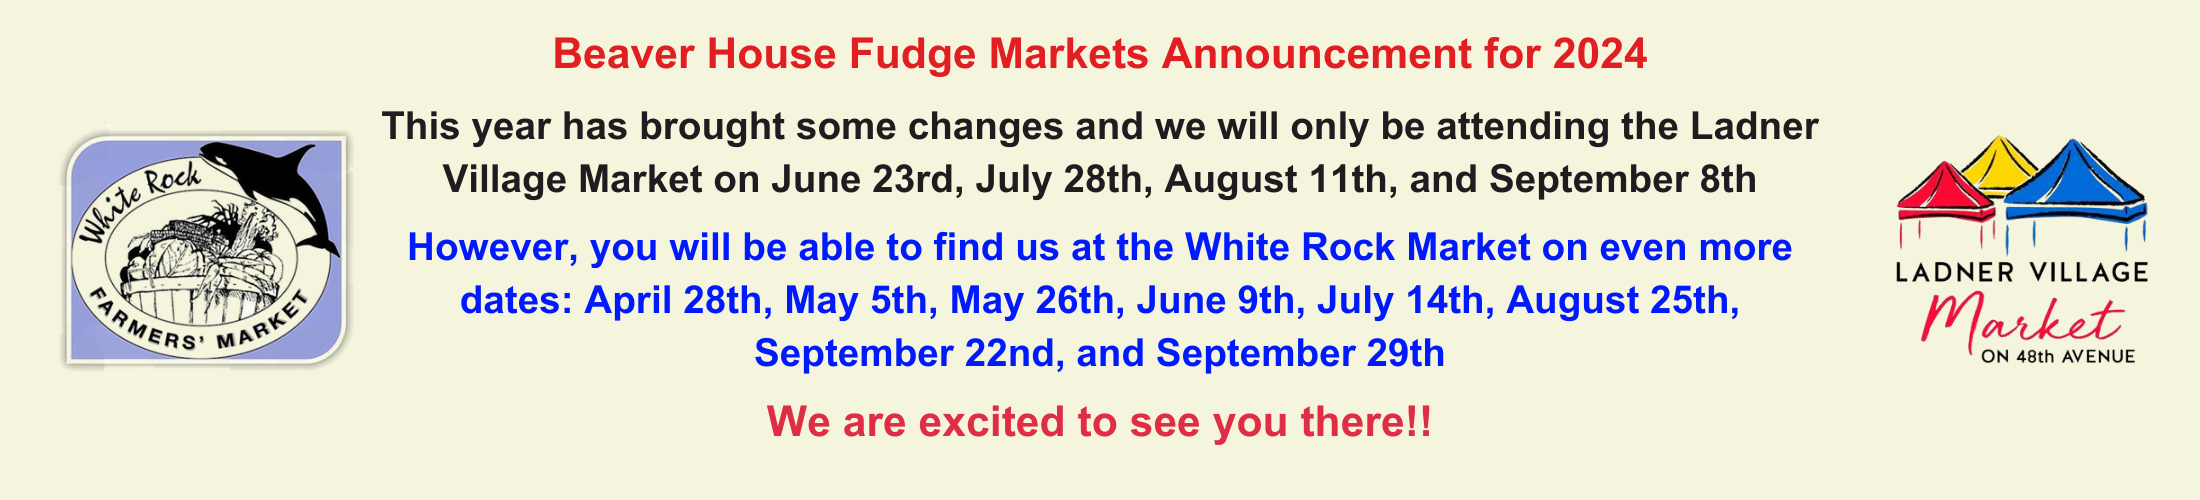 White Rock and Ladner Village Market Announcement for 2024